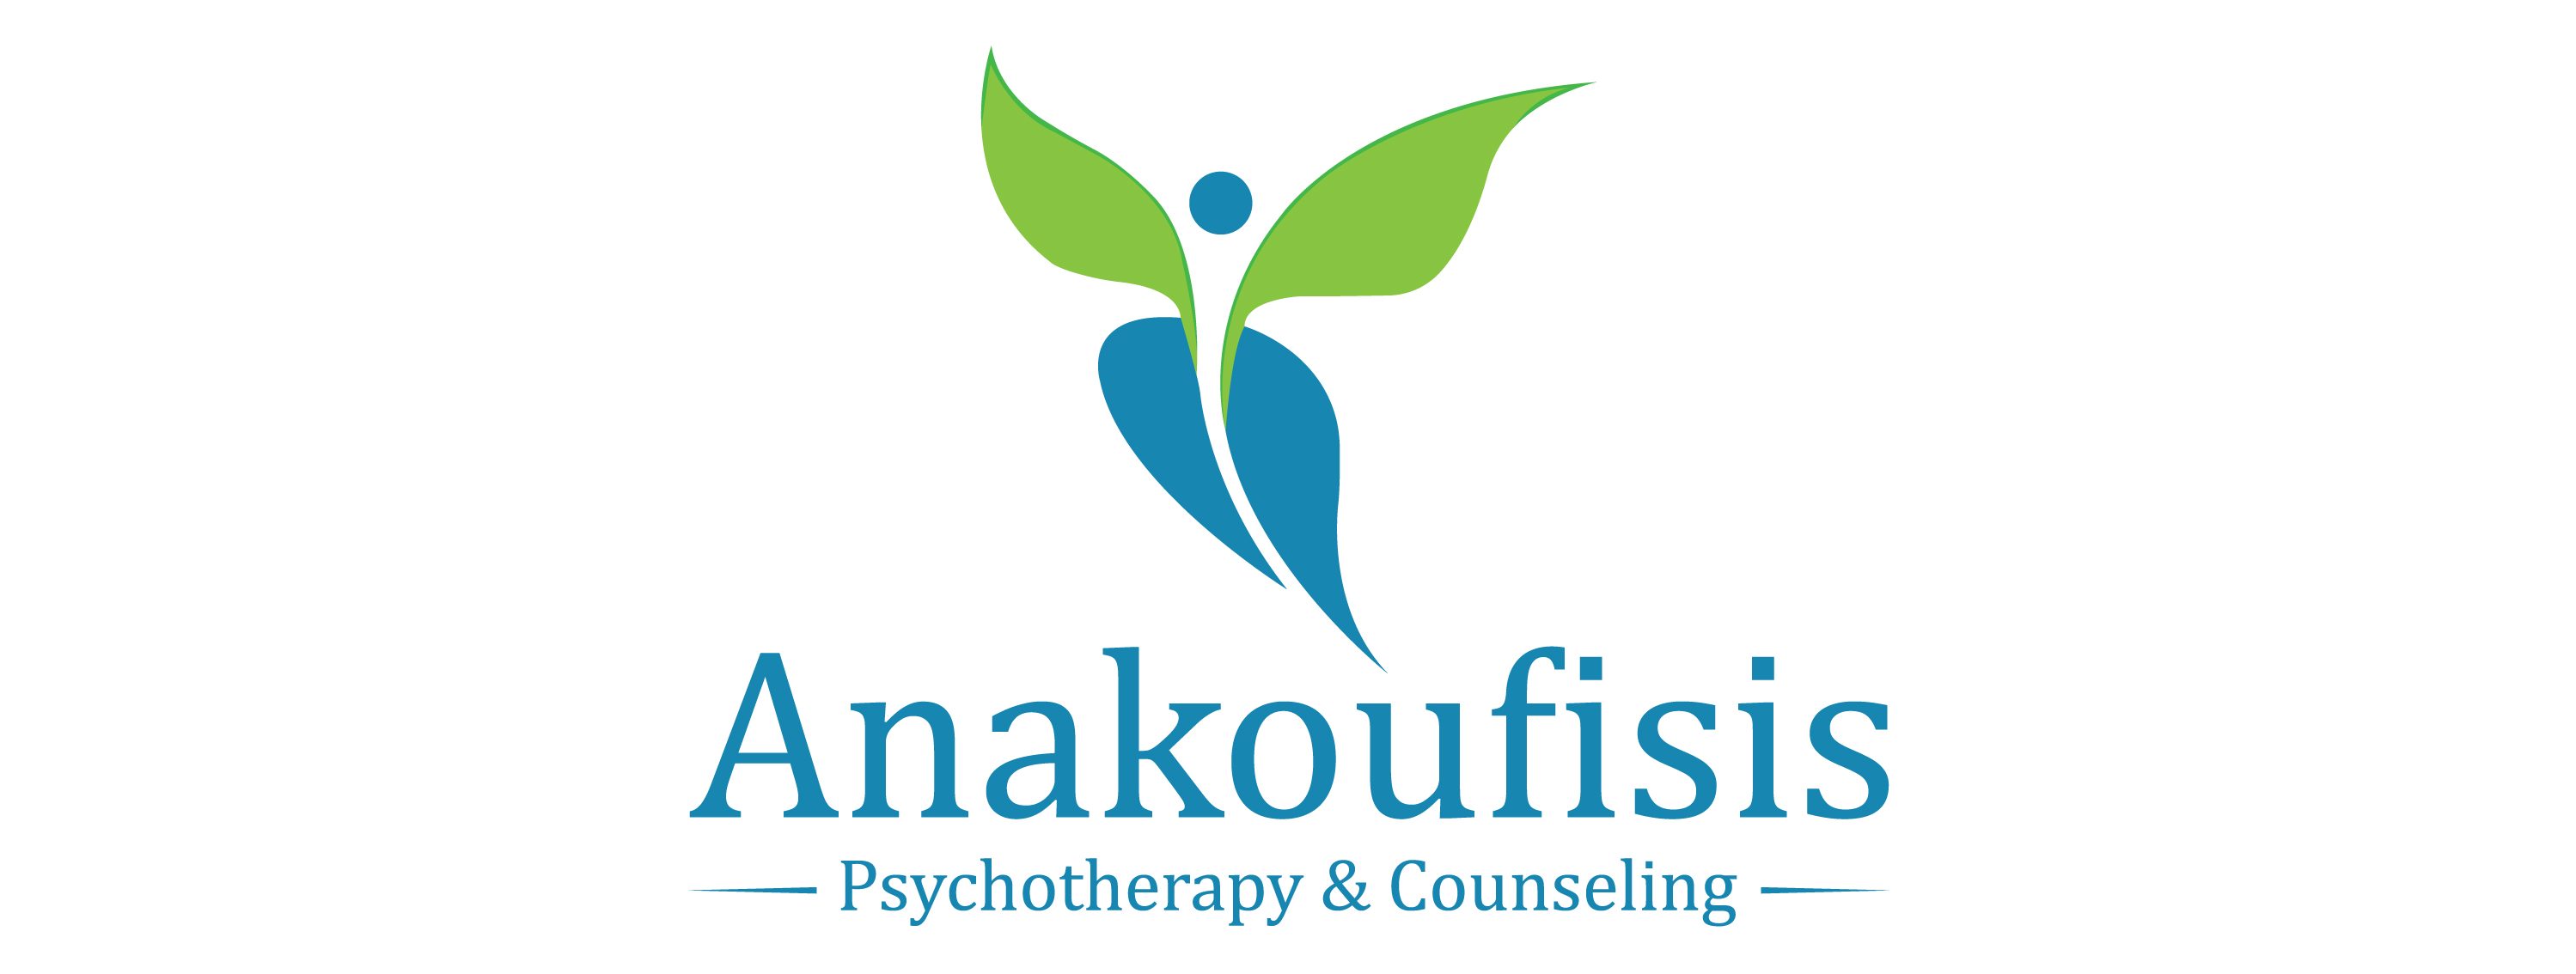 Anakoufisis- Psychotherapy & Counseling